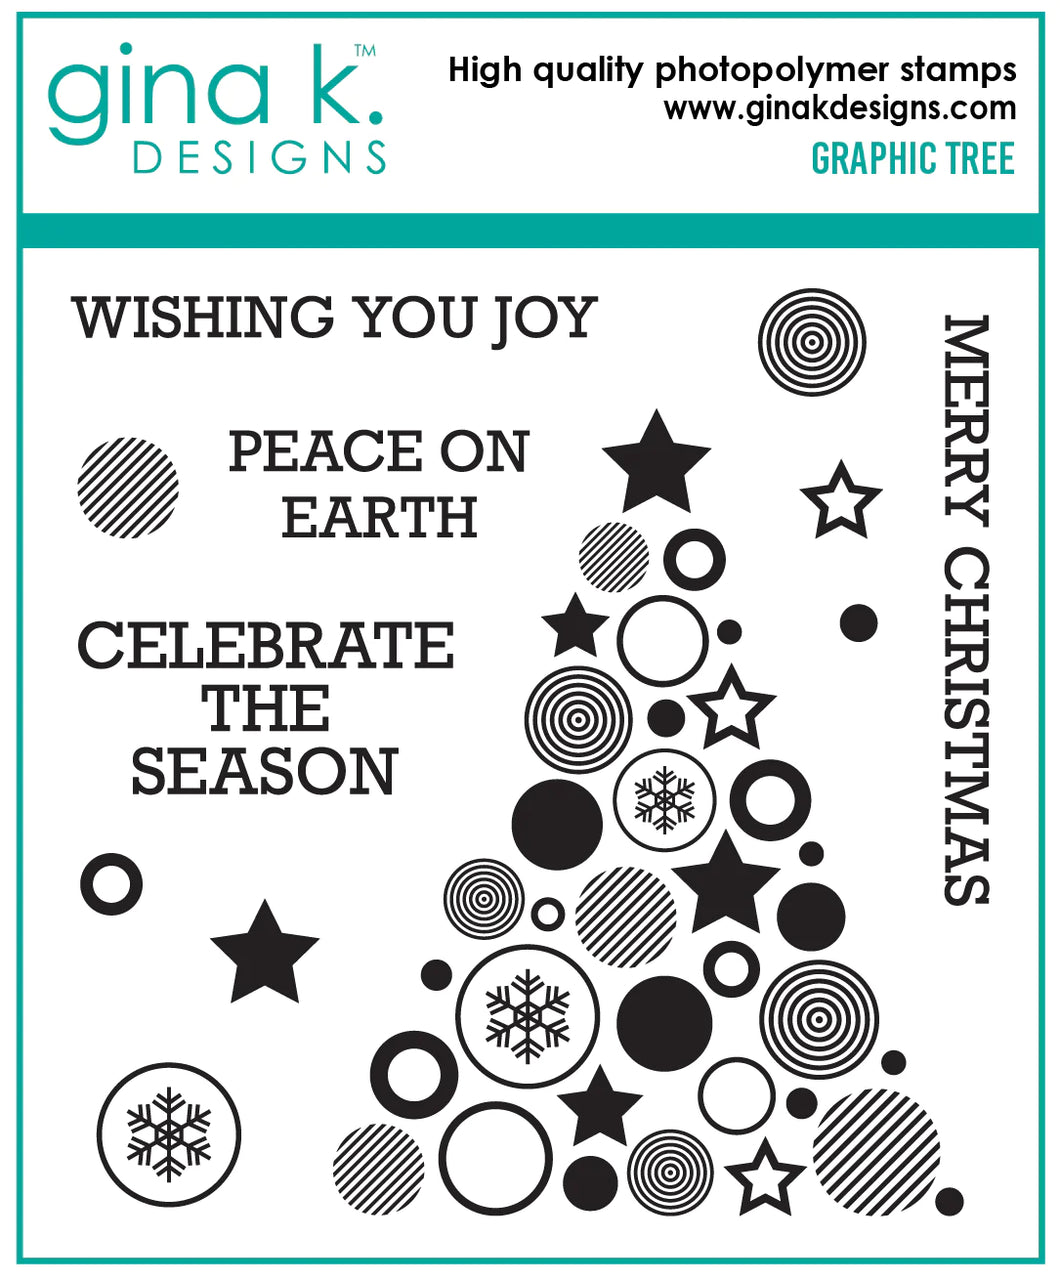 Gina K. Designs - Stamp & Die Set - Graphic Tree. Graphic Tree is a stamp & die set by Gina K Designs. This set is made of premium clear photopolymer and measures 6